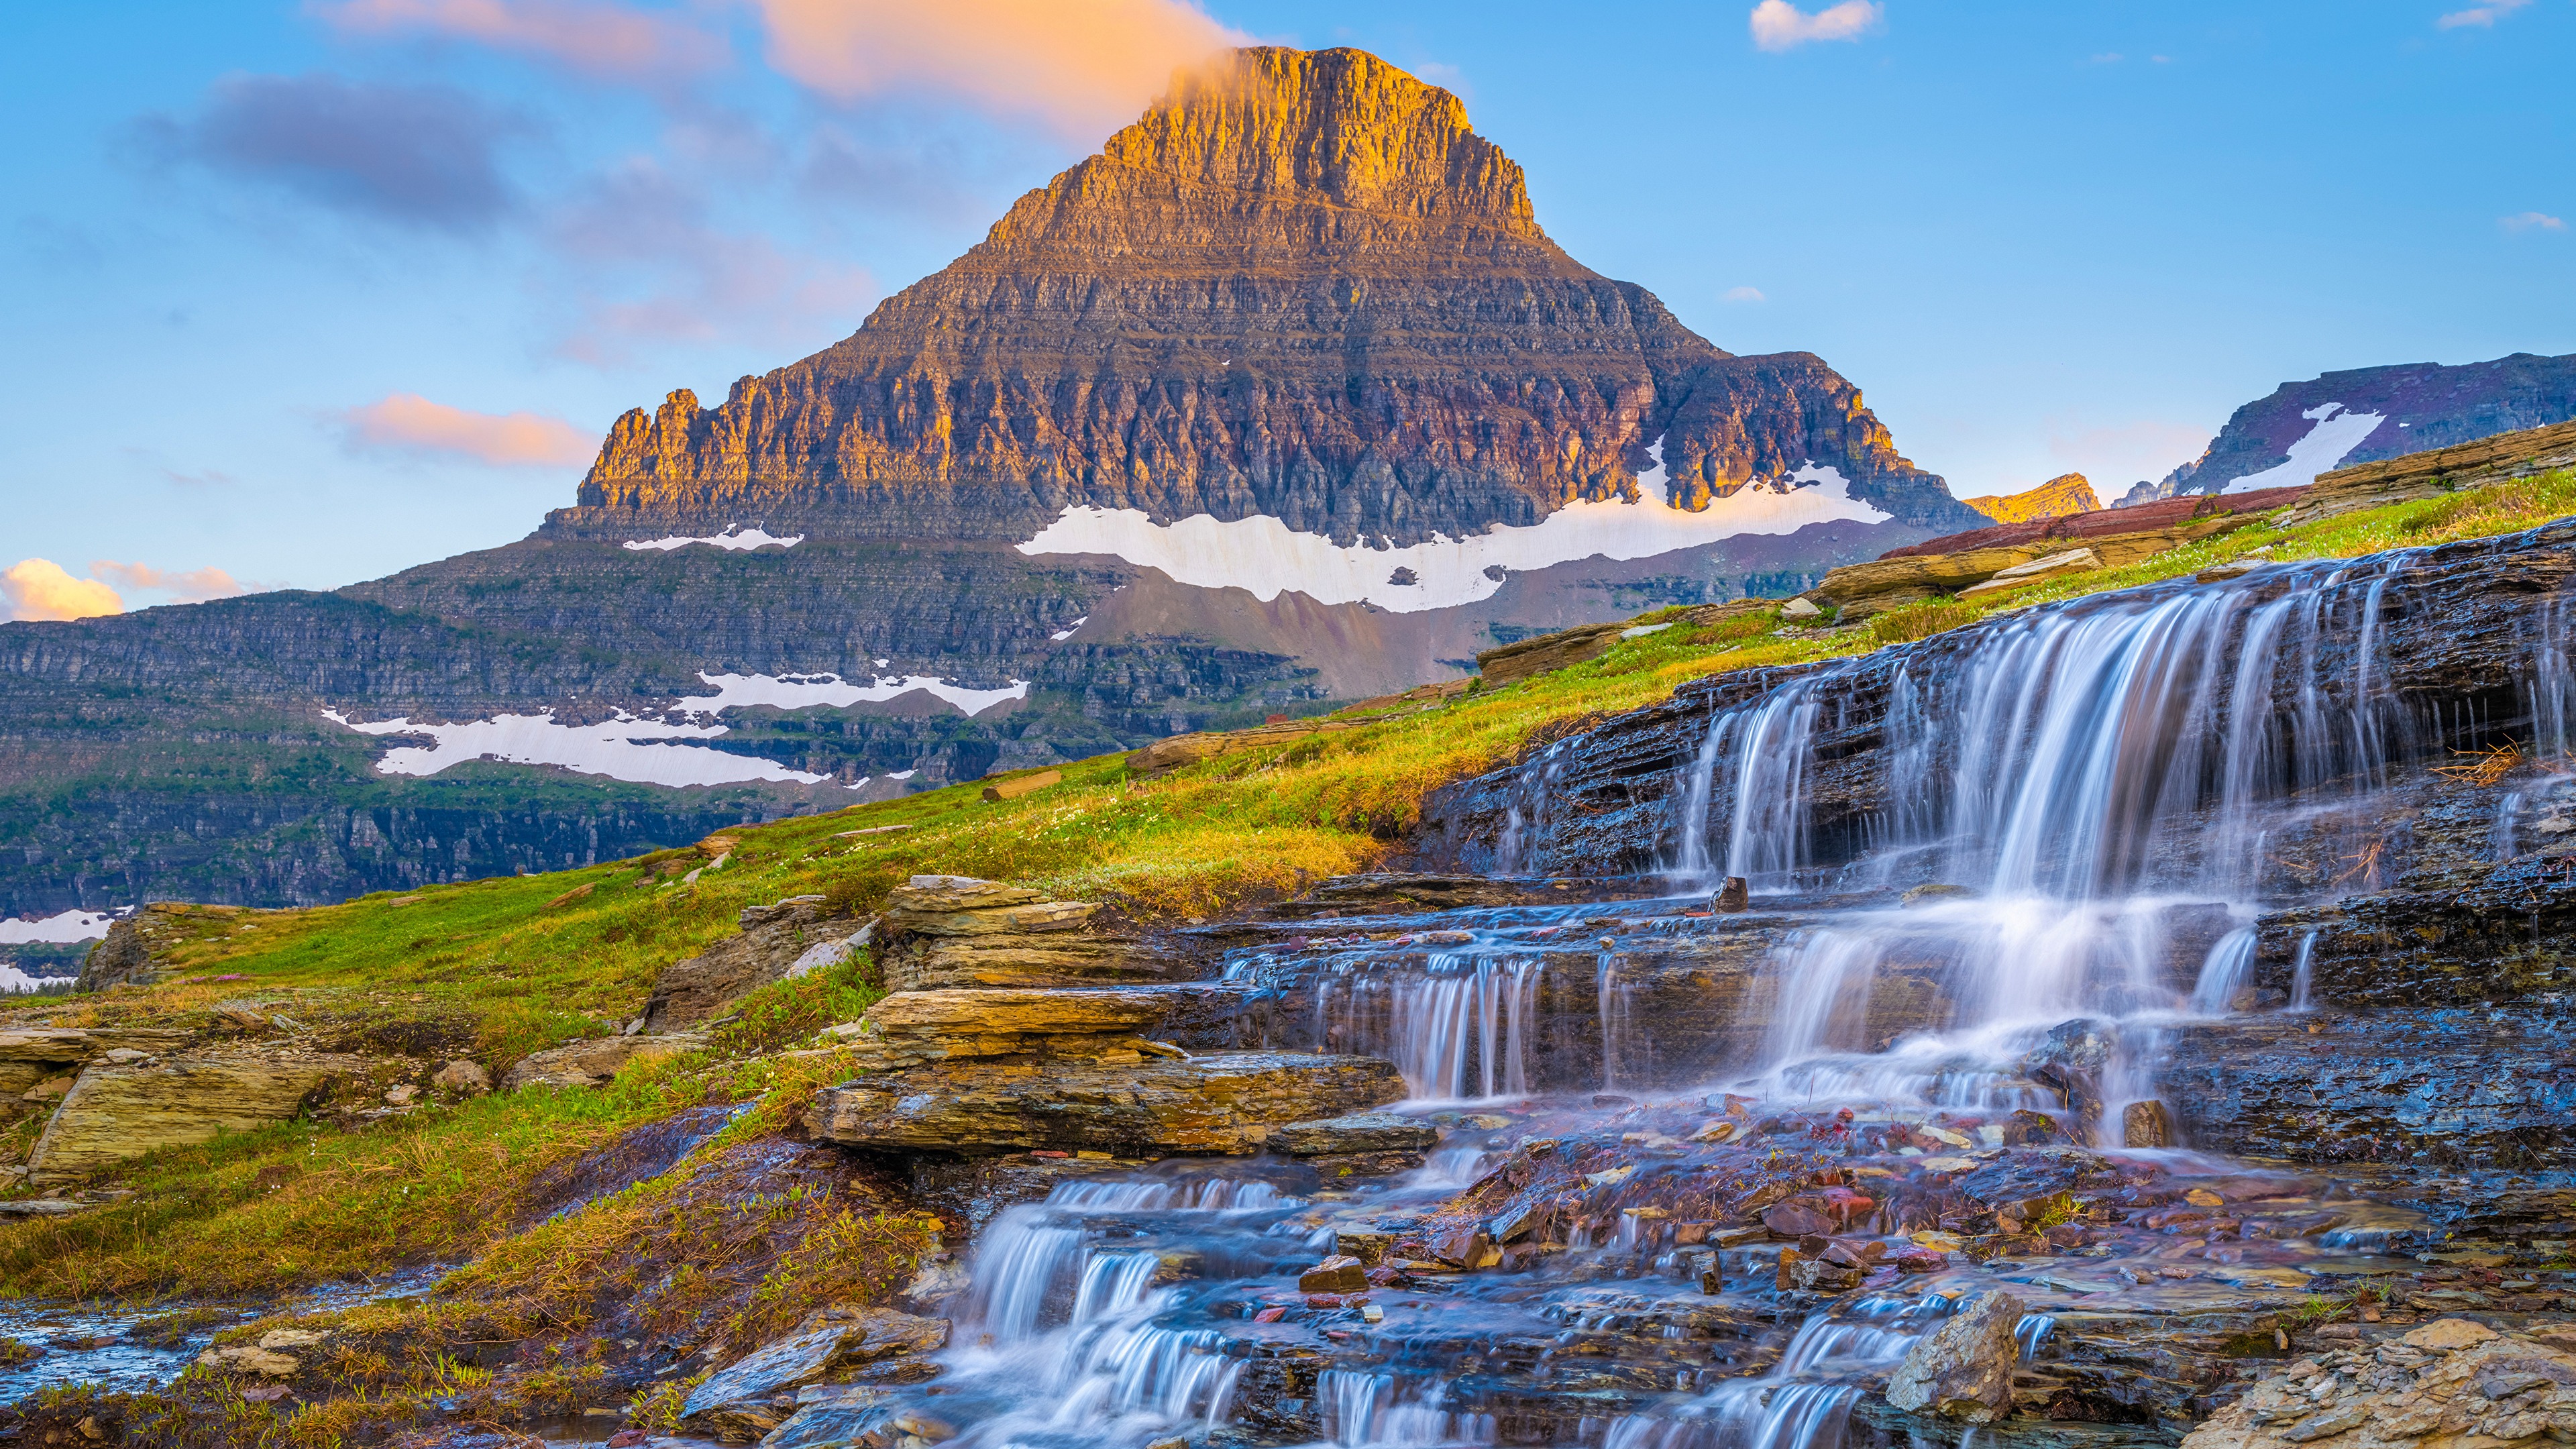 General 3840x2160 nature landscape USA mountains sky waterfall rocks snow sunset glow water clouds